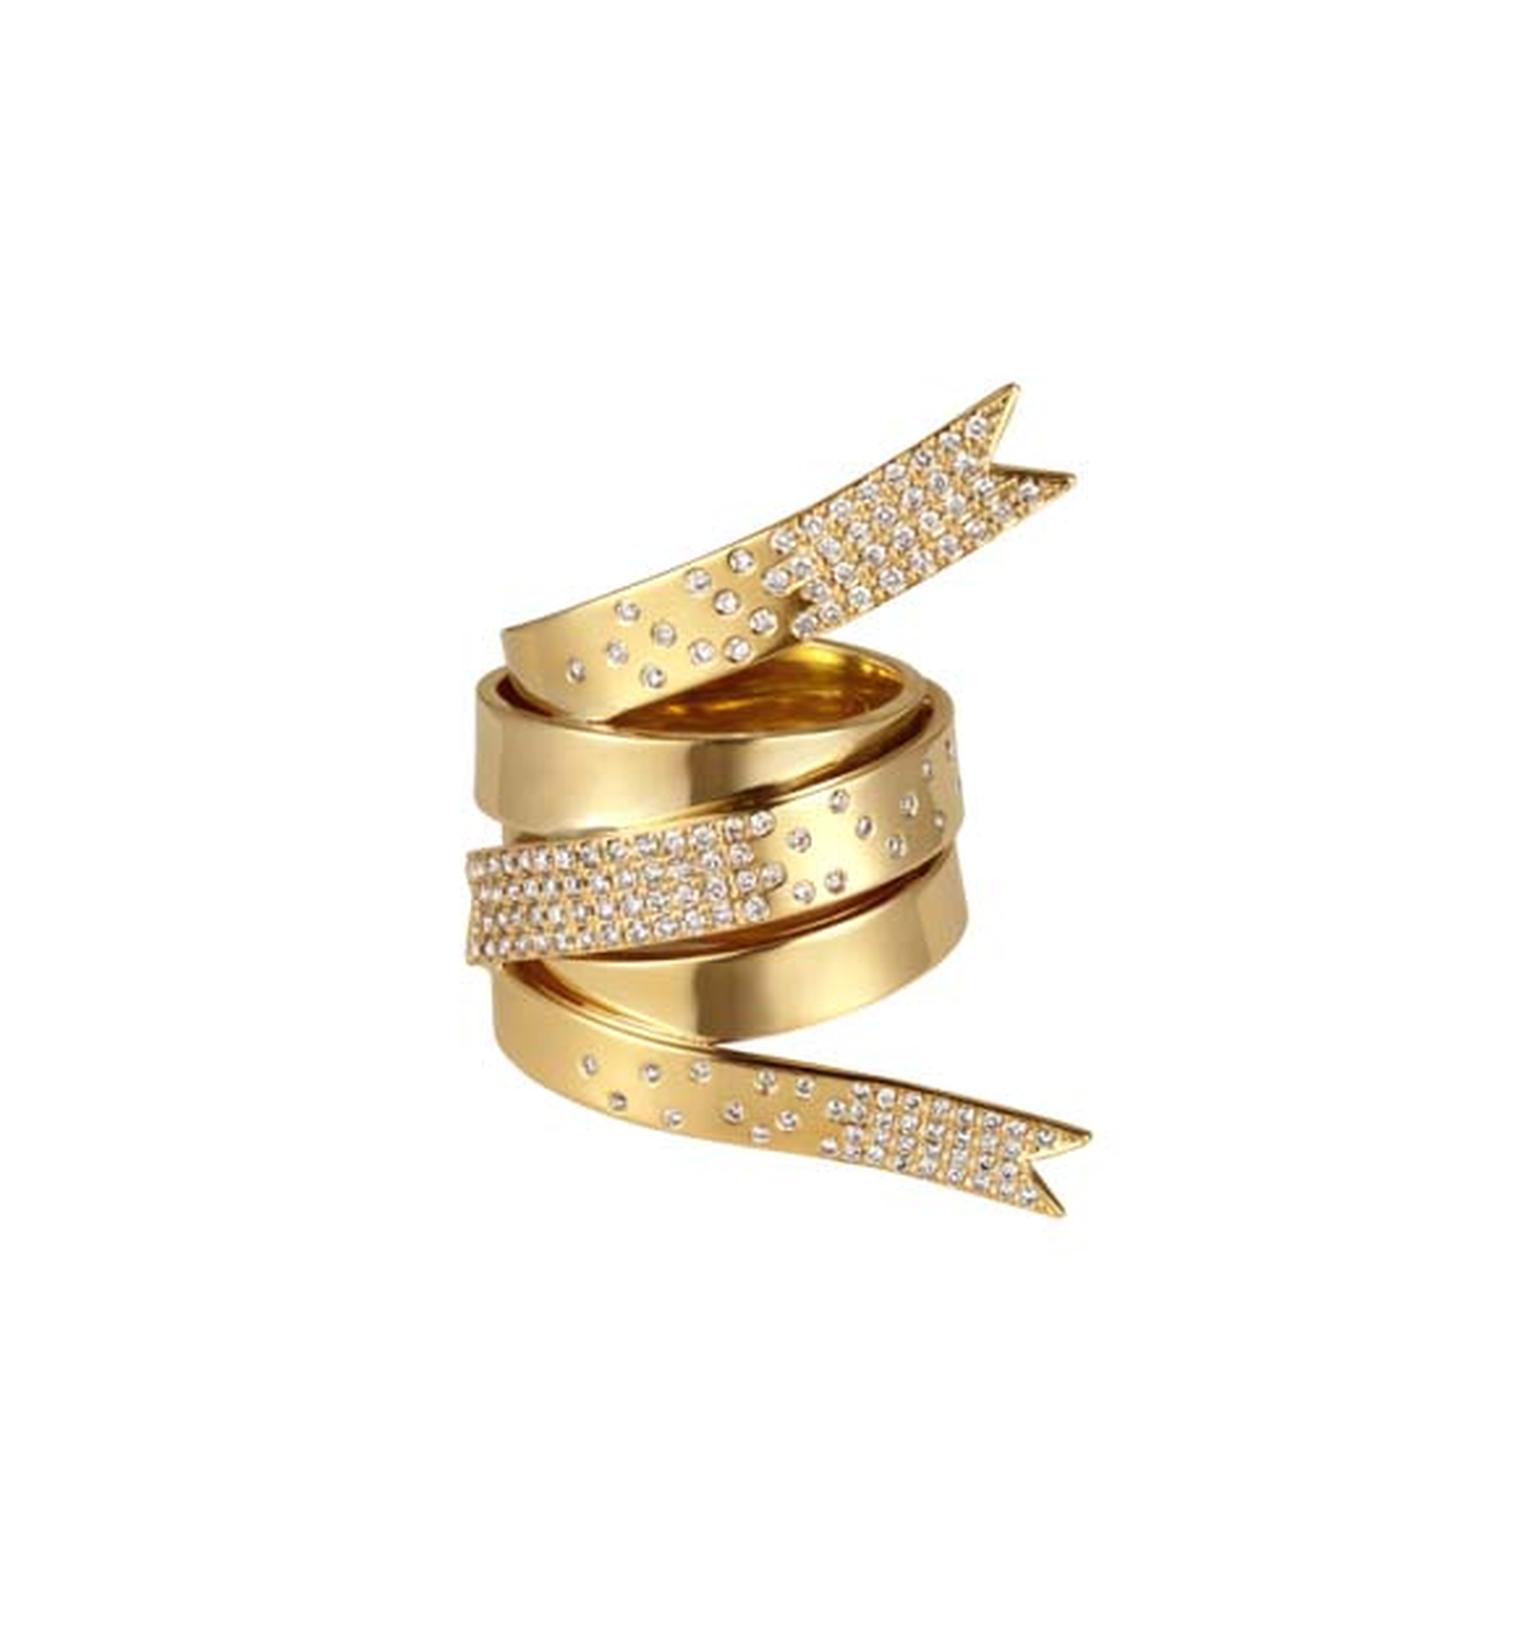 Yellow gold ring featuring a one-of-a-kind ribbon design with white diamonds by Greek designer Elena Votsi, who redesigned the Olympic medal in 2004.